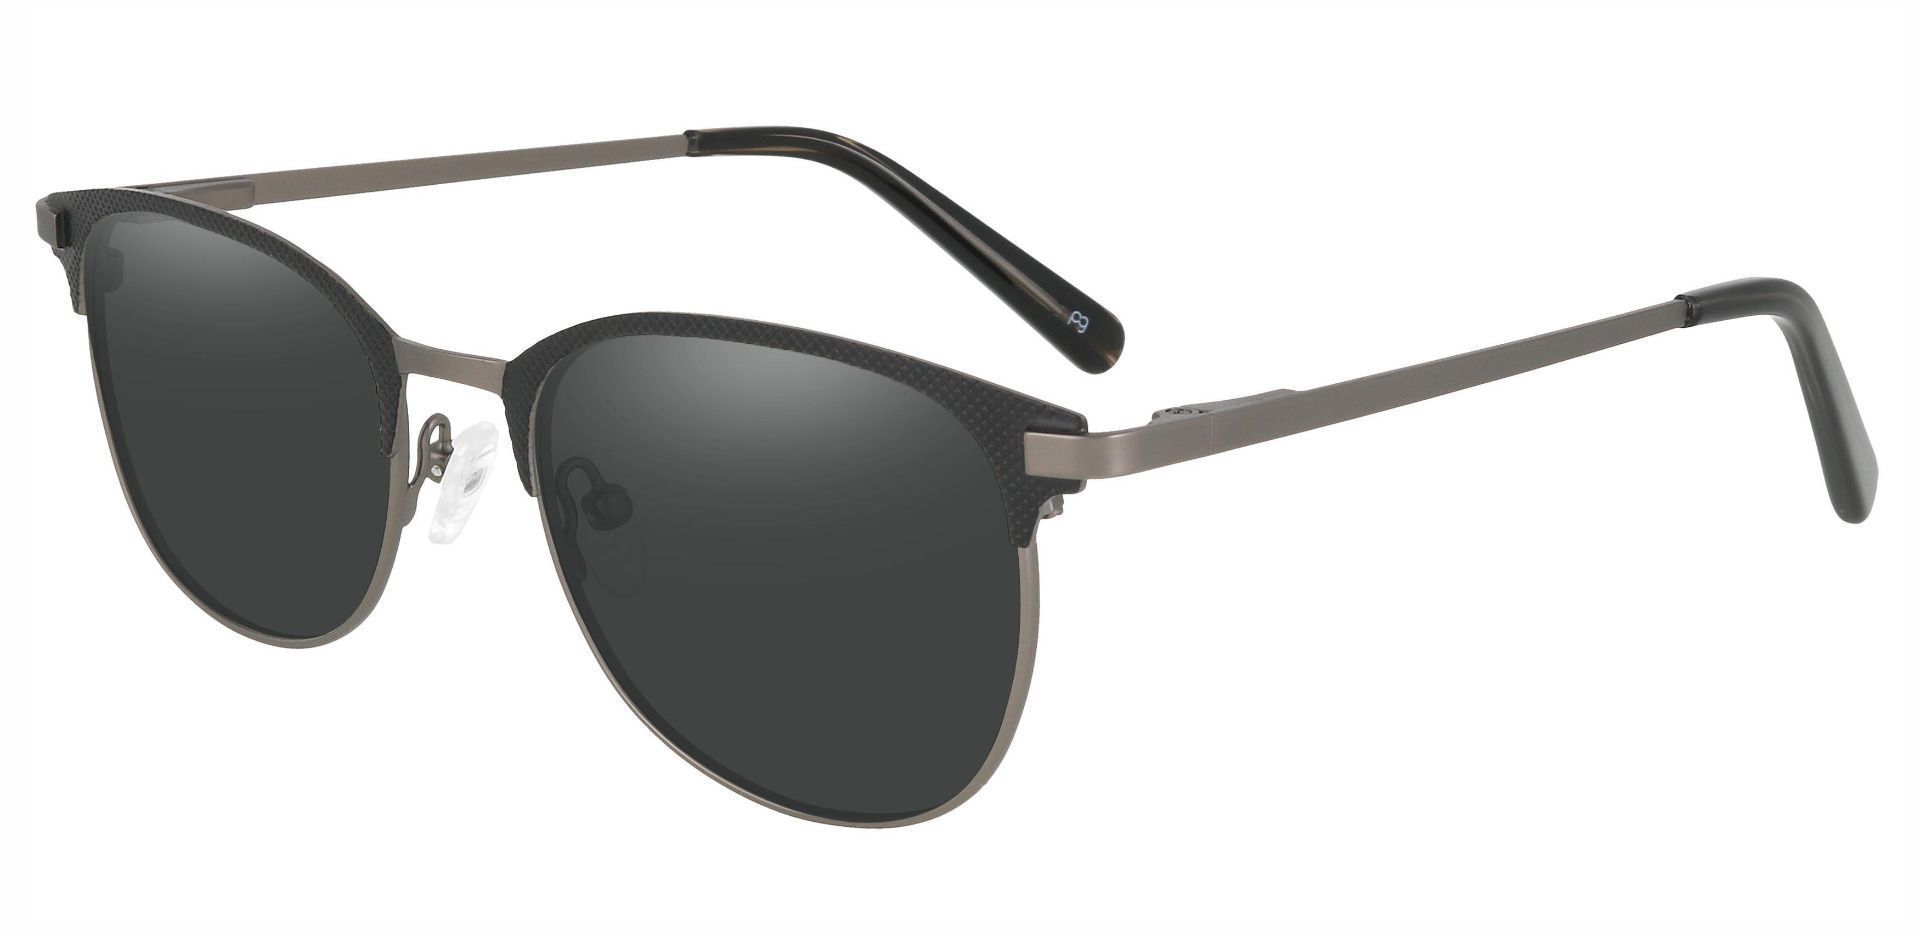 Roscoe Oval Non-Rx Sunglasses - Black Frame With Gray Lenses